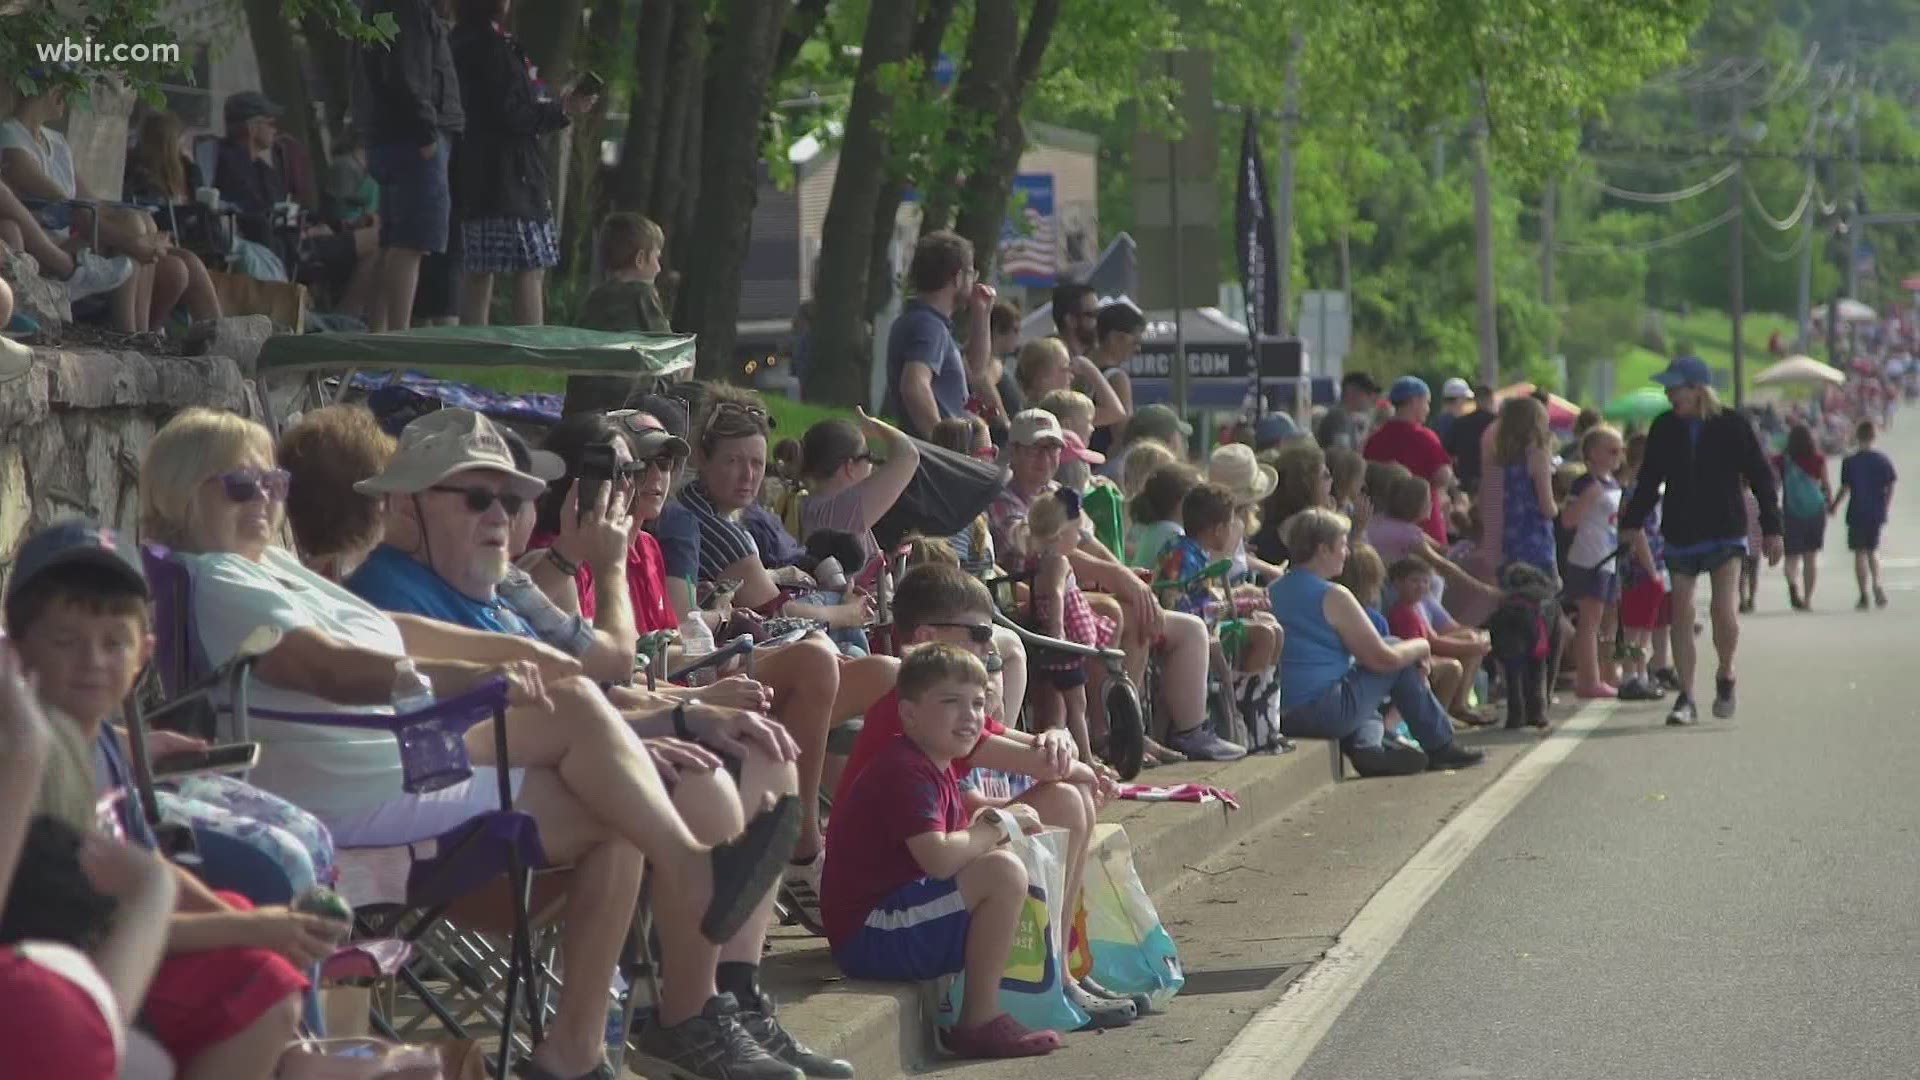 Floats cruised down roads in Farragut and Powell on Saturday for Independence Day celebrations.